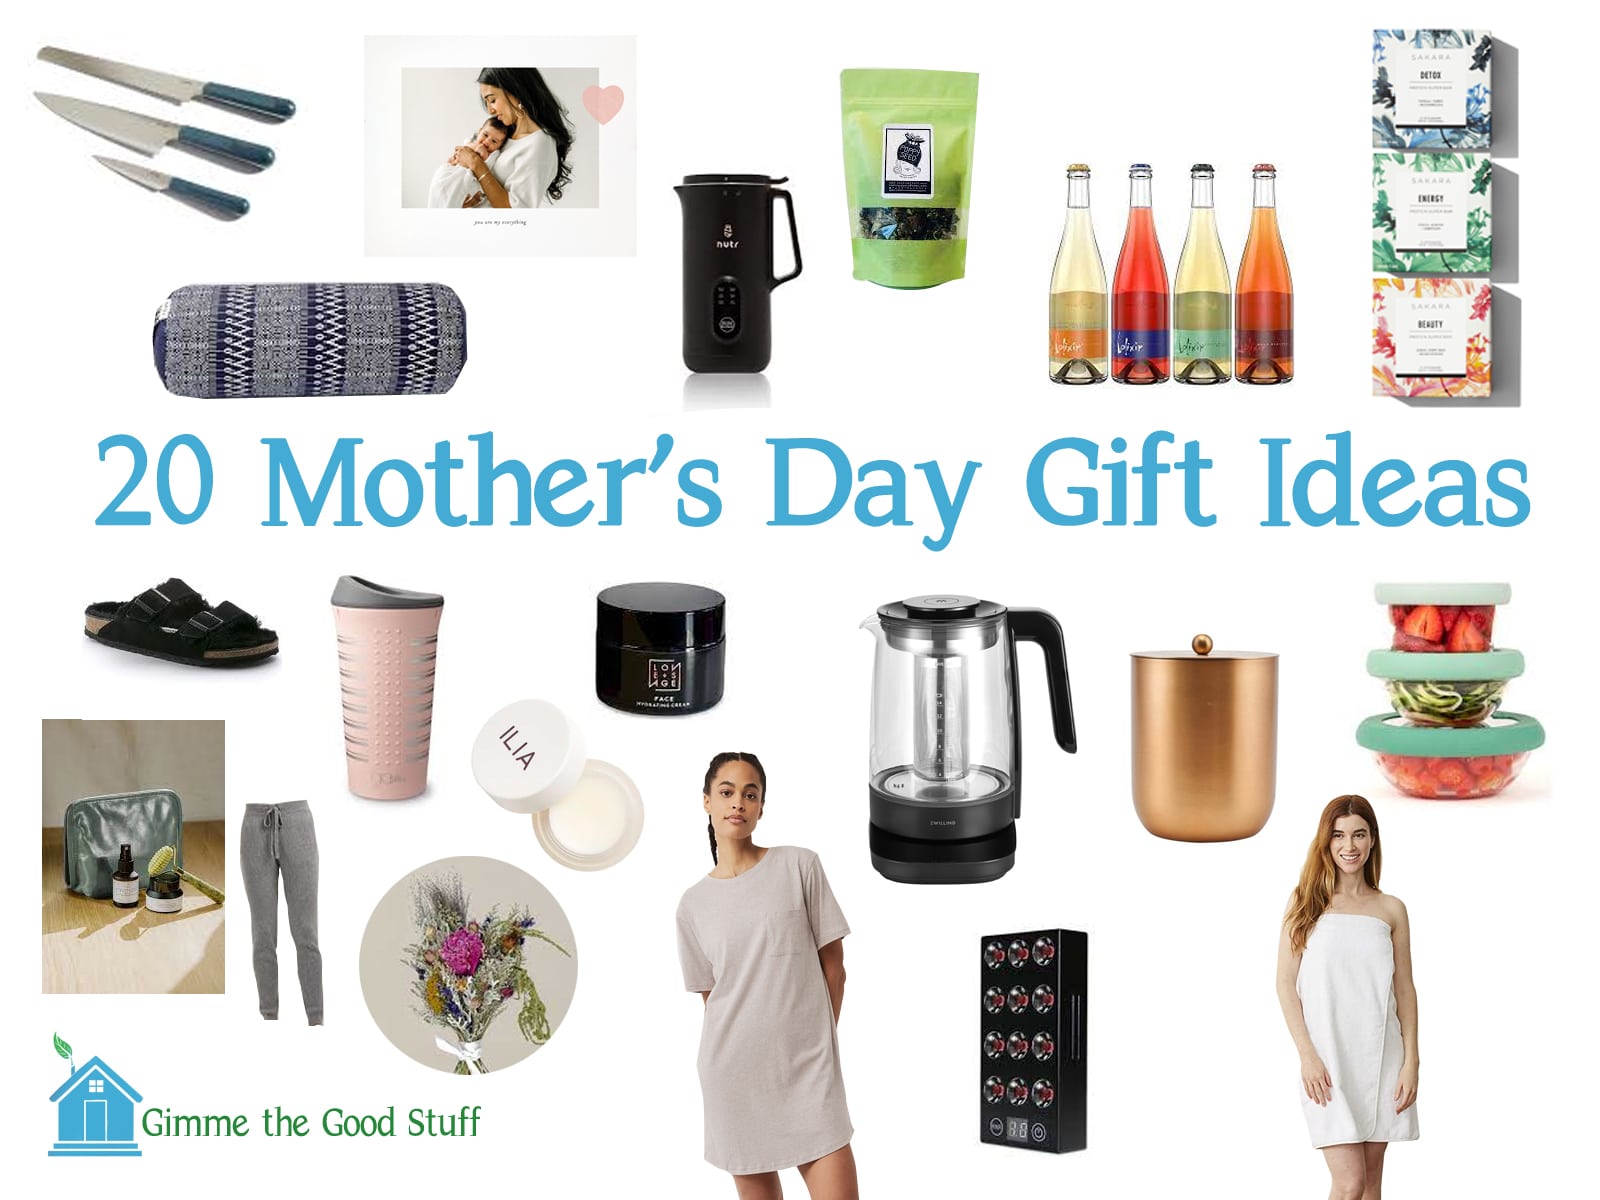 20 Mother’s Day Gift Ideas for 2022